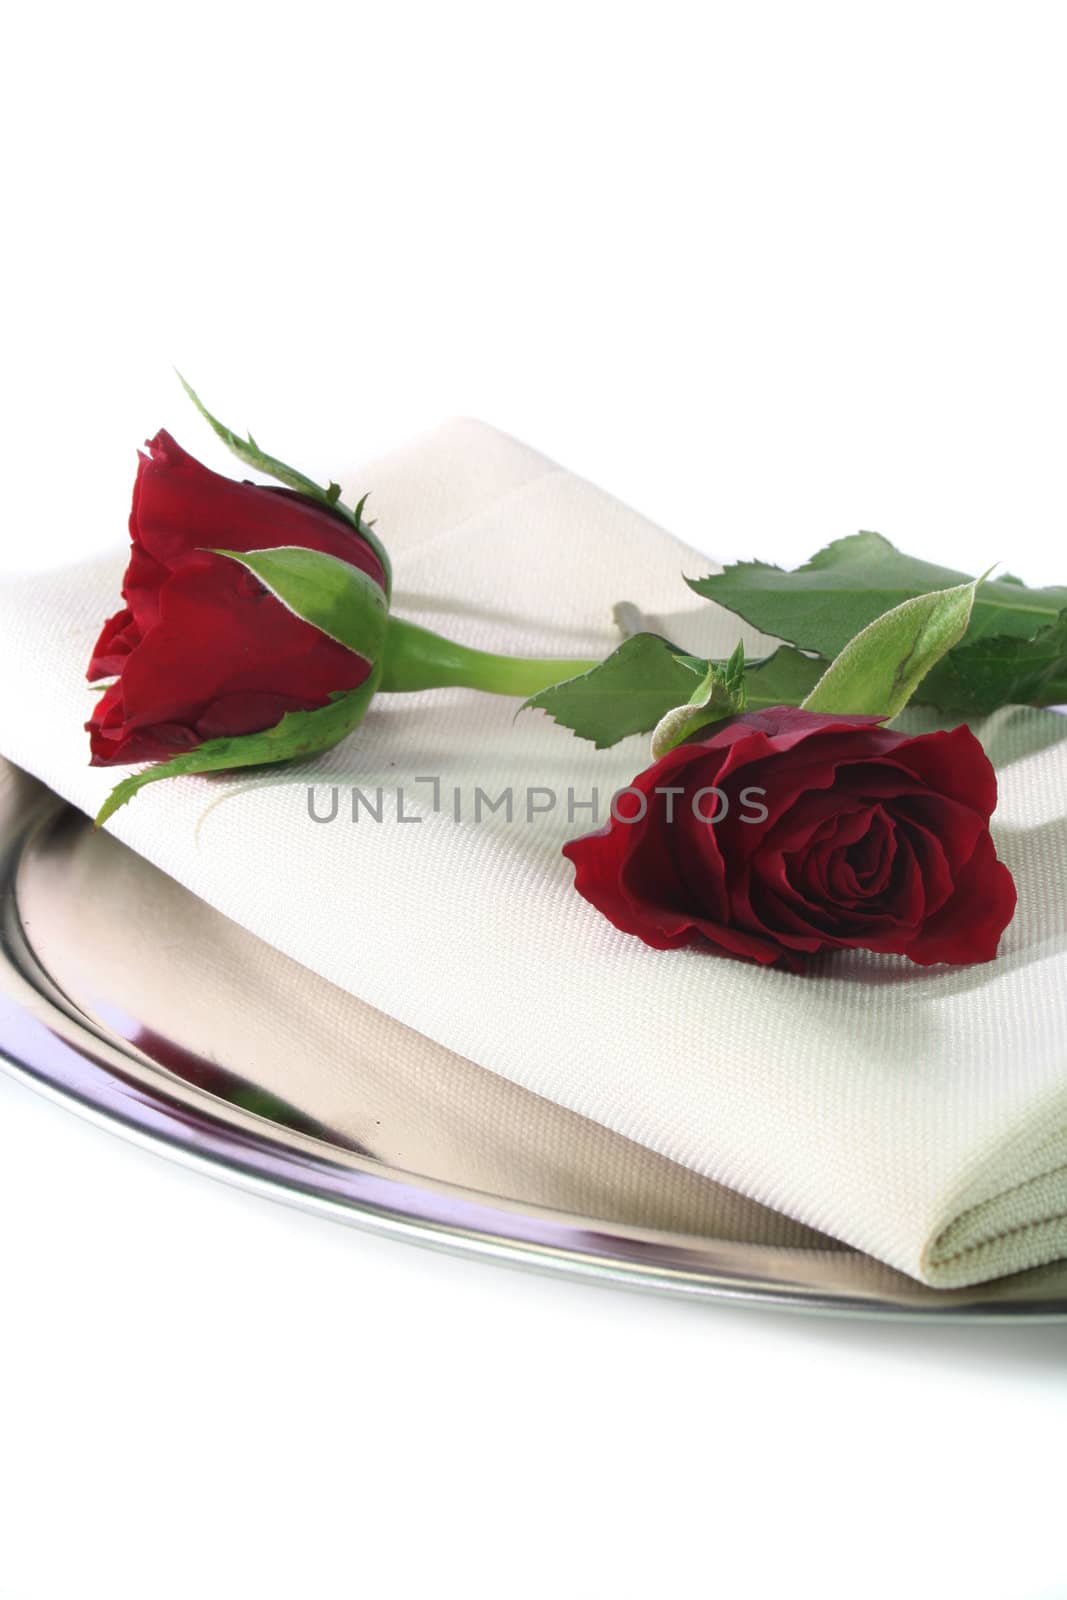 two roses on a tray